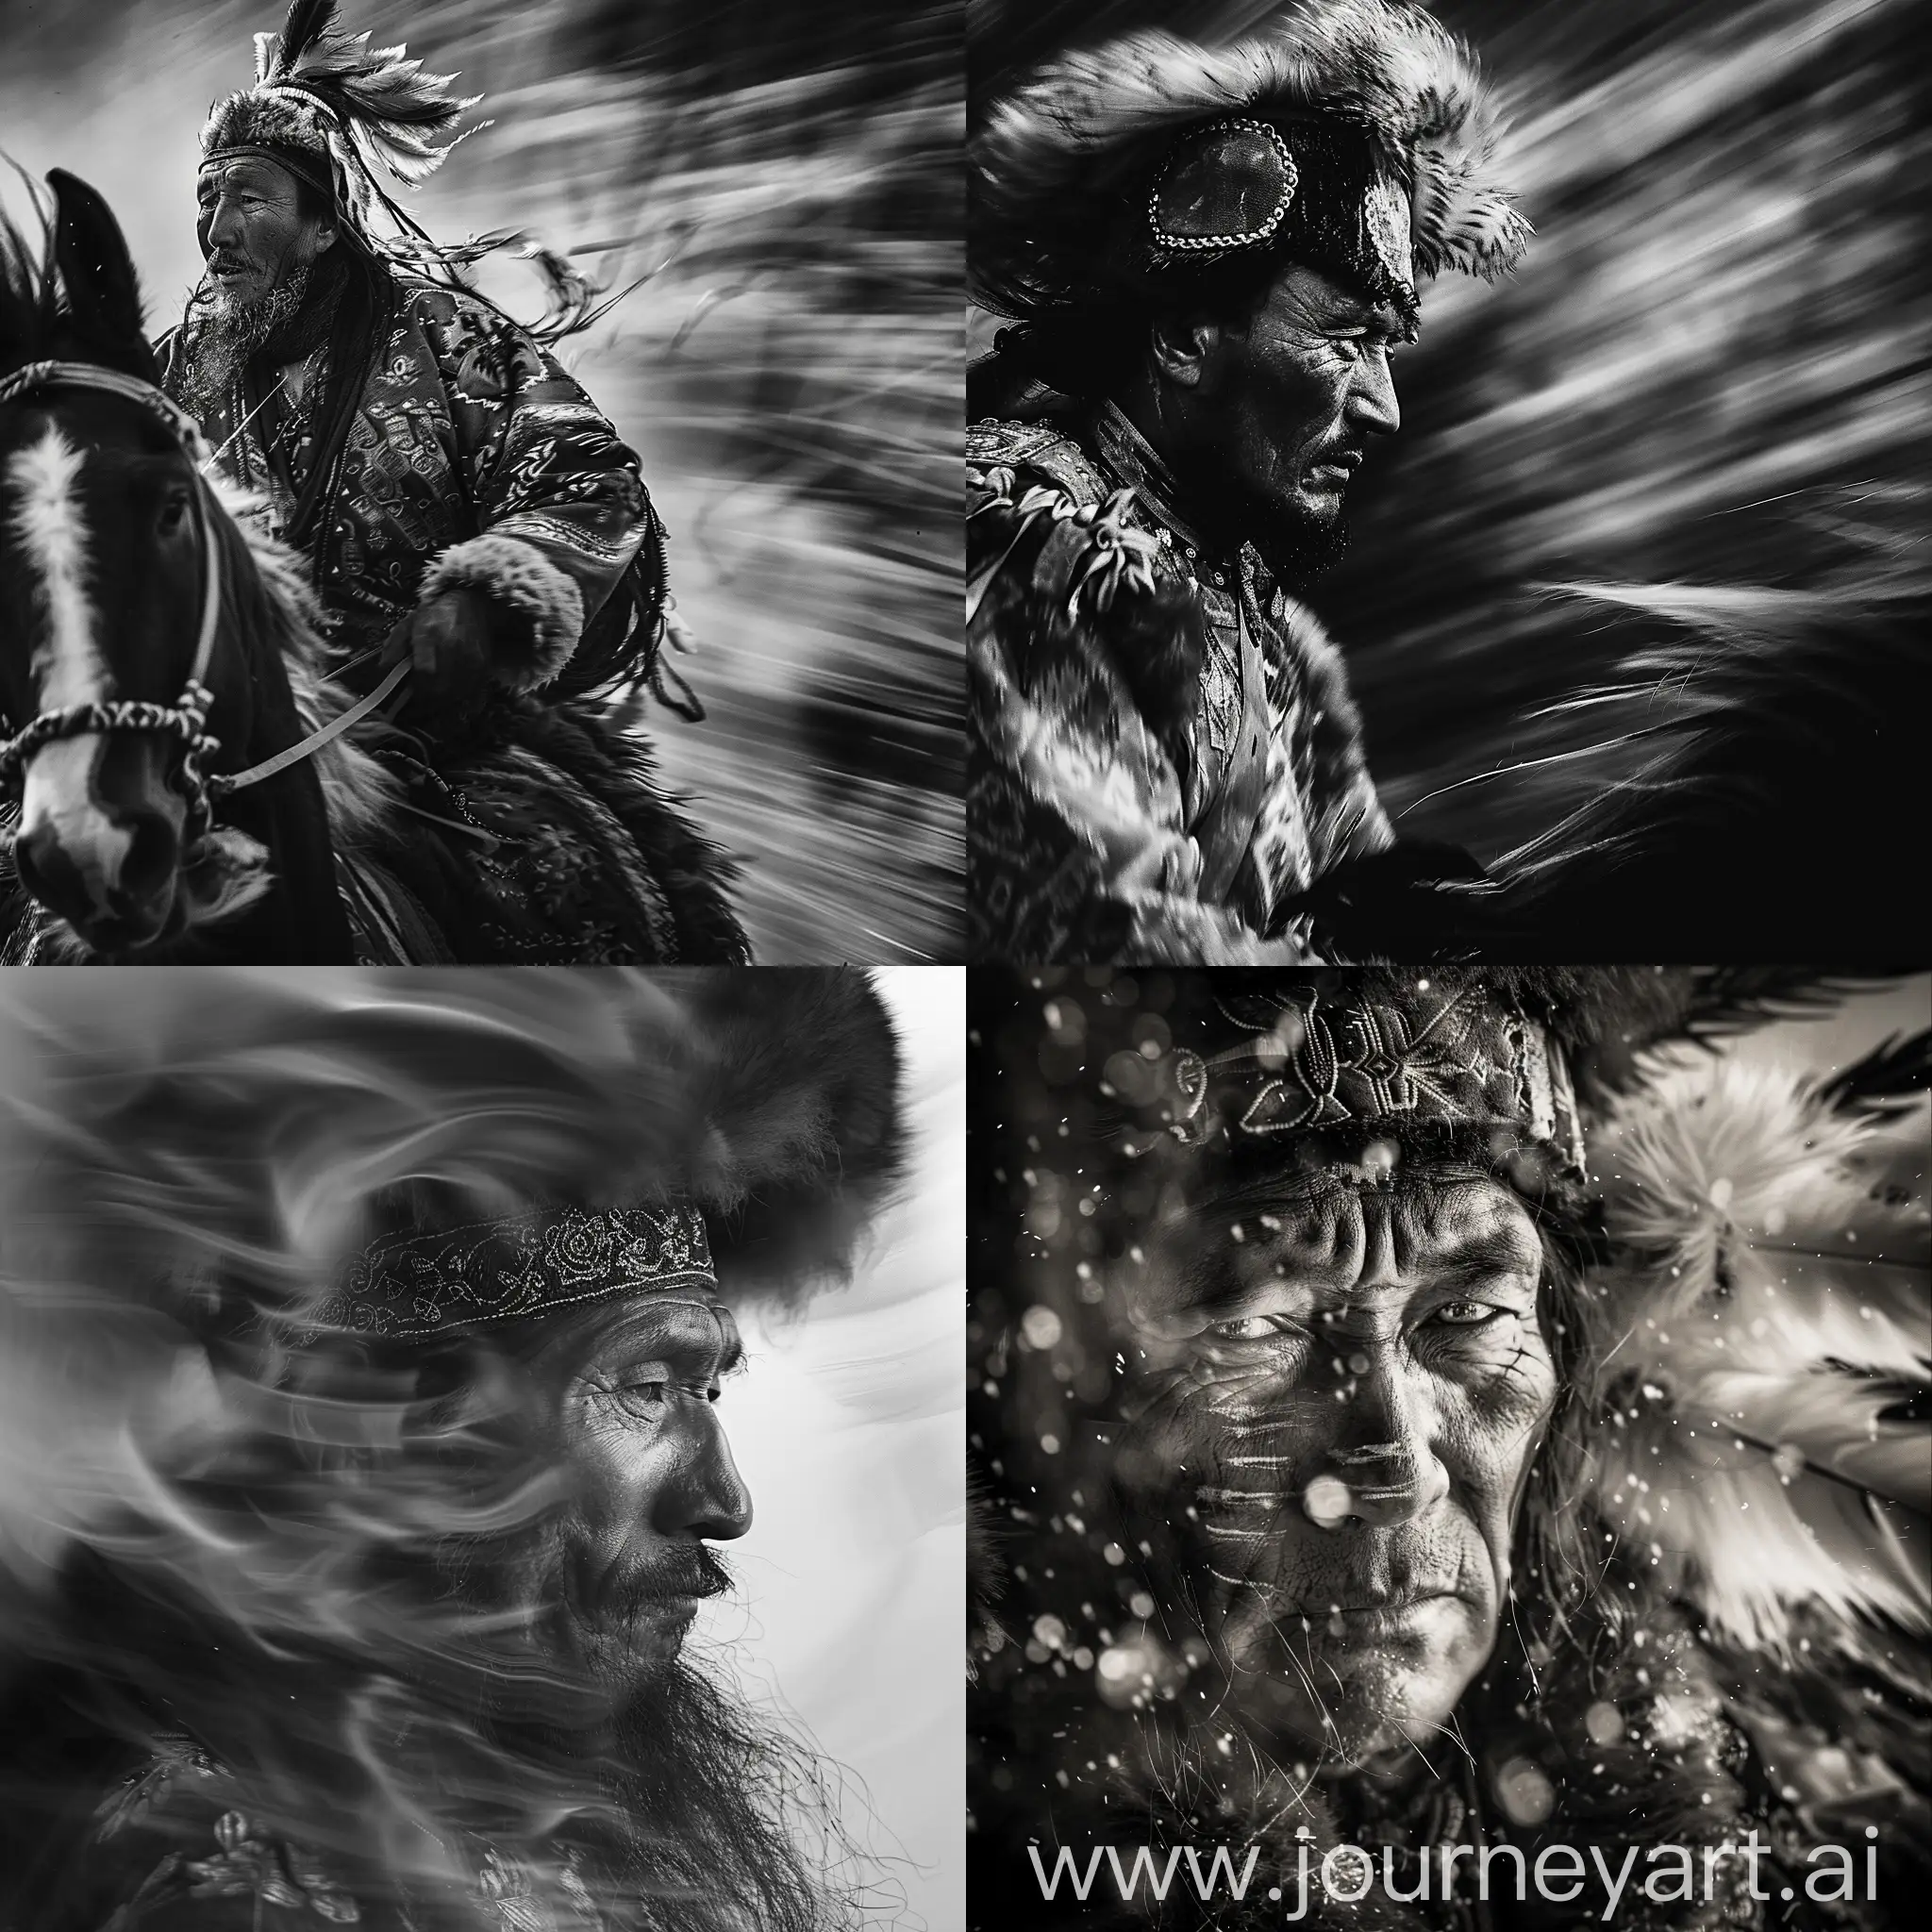 Ethereal-Minimalist-Portrait-of-a-Kazakh-Warrior-in-Black-and-White